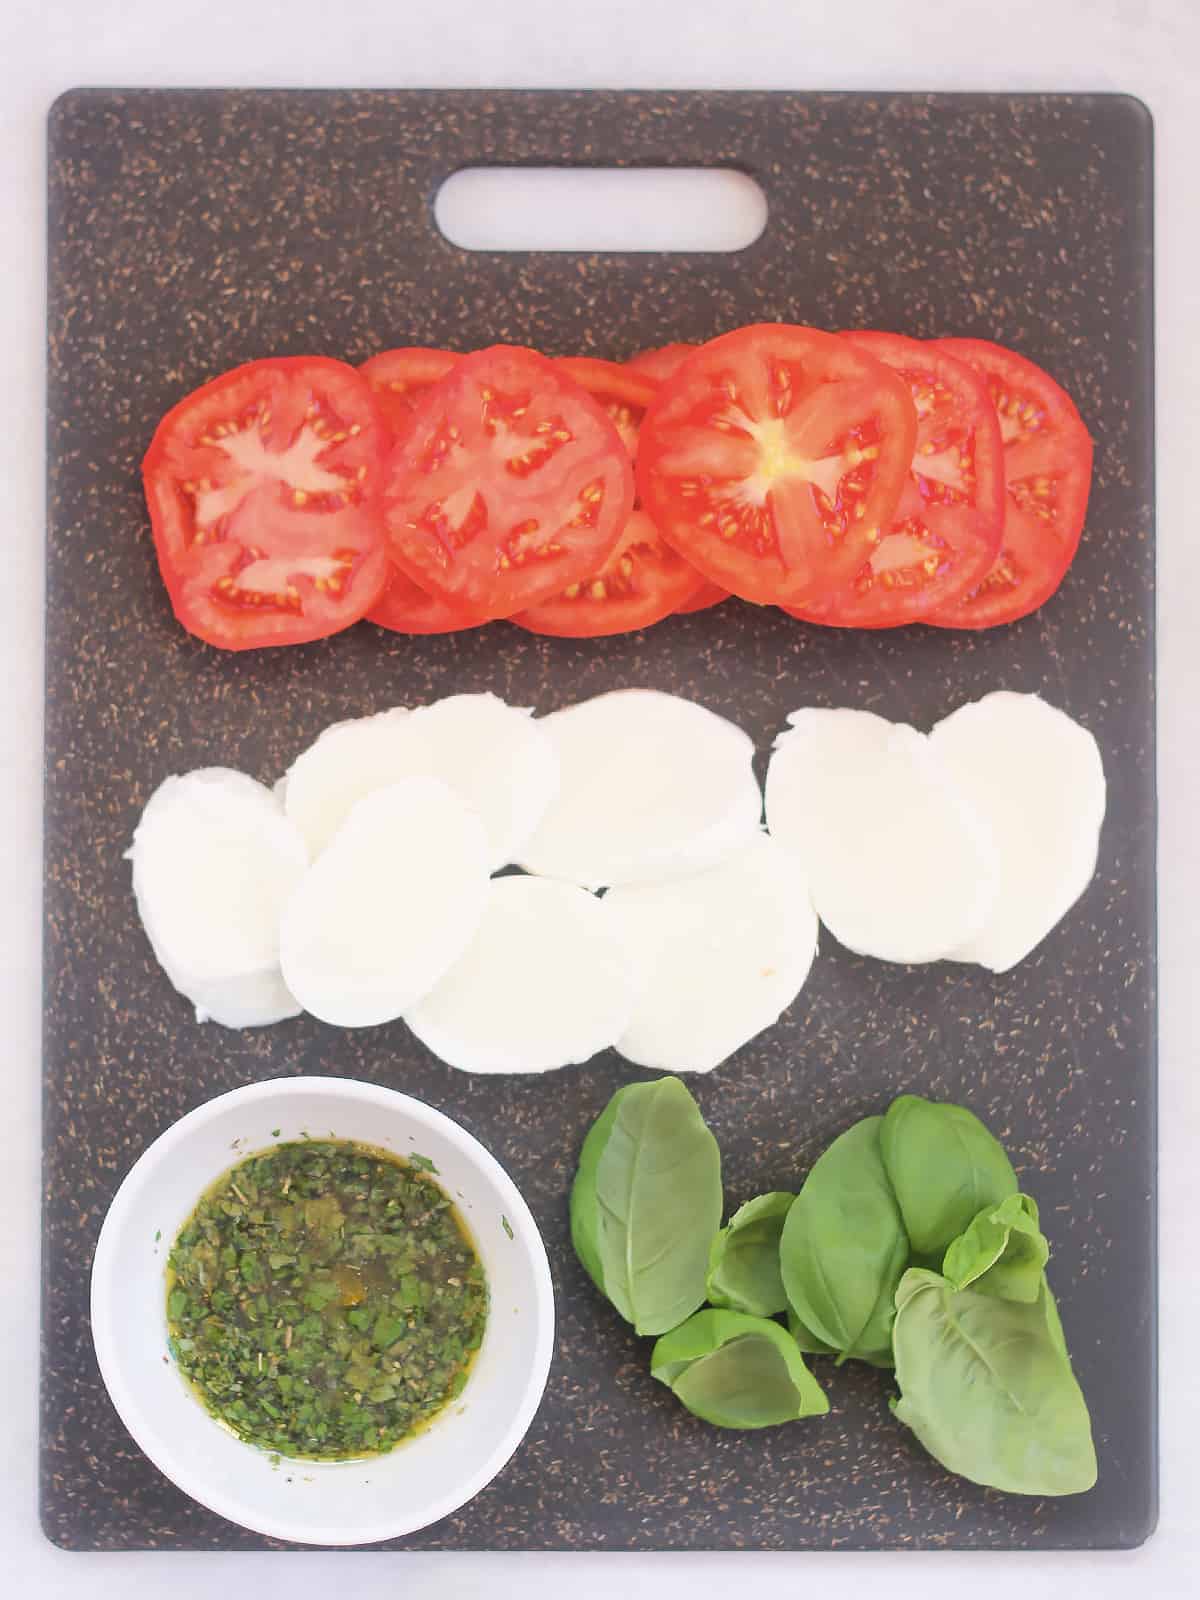 Ingredients to make caprese salad stacks on a chopping board.